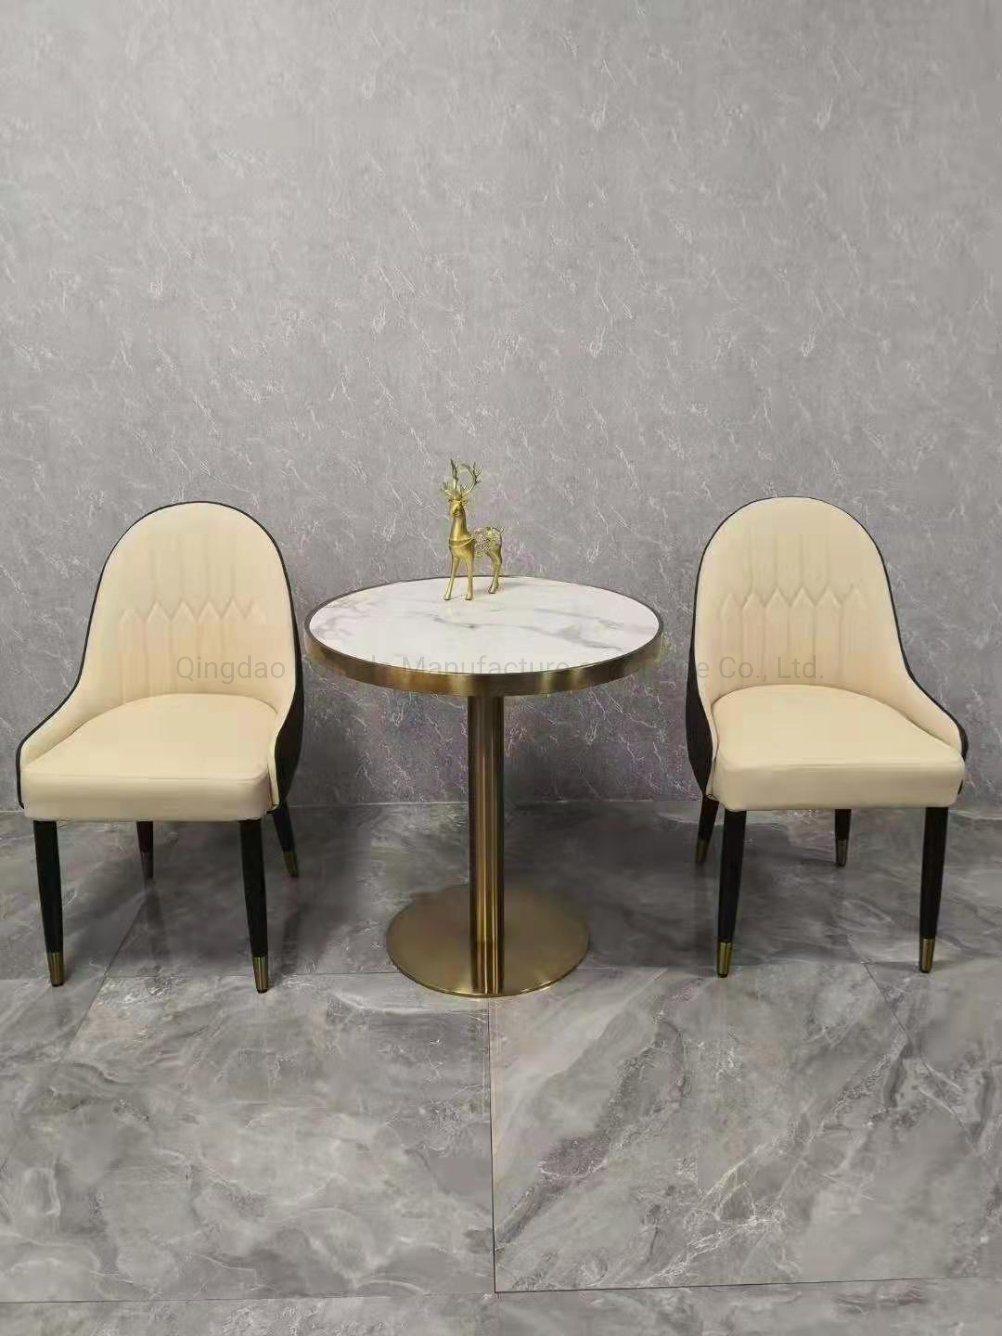 Whole Sale French Fabric Leather Velvet Upholstered Modern Dining Room Chair for Restaurant, French Luxury Dining Chair